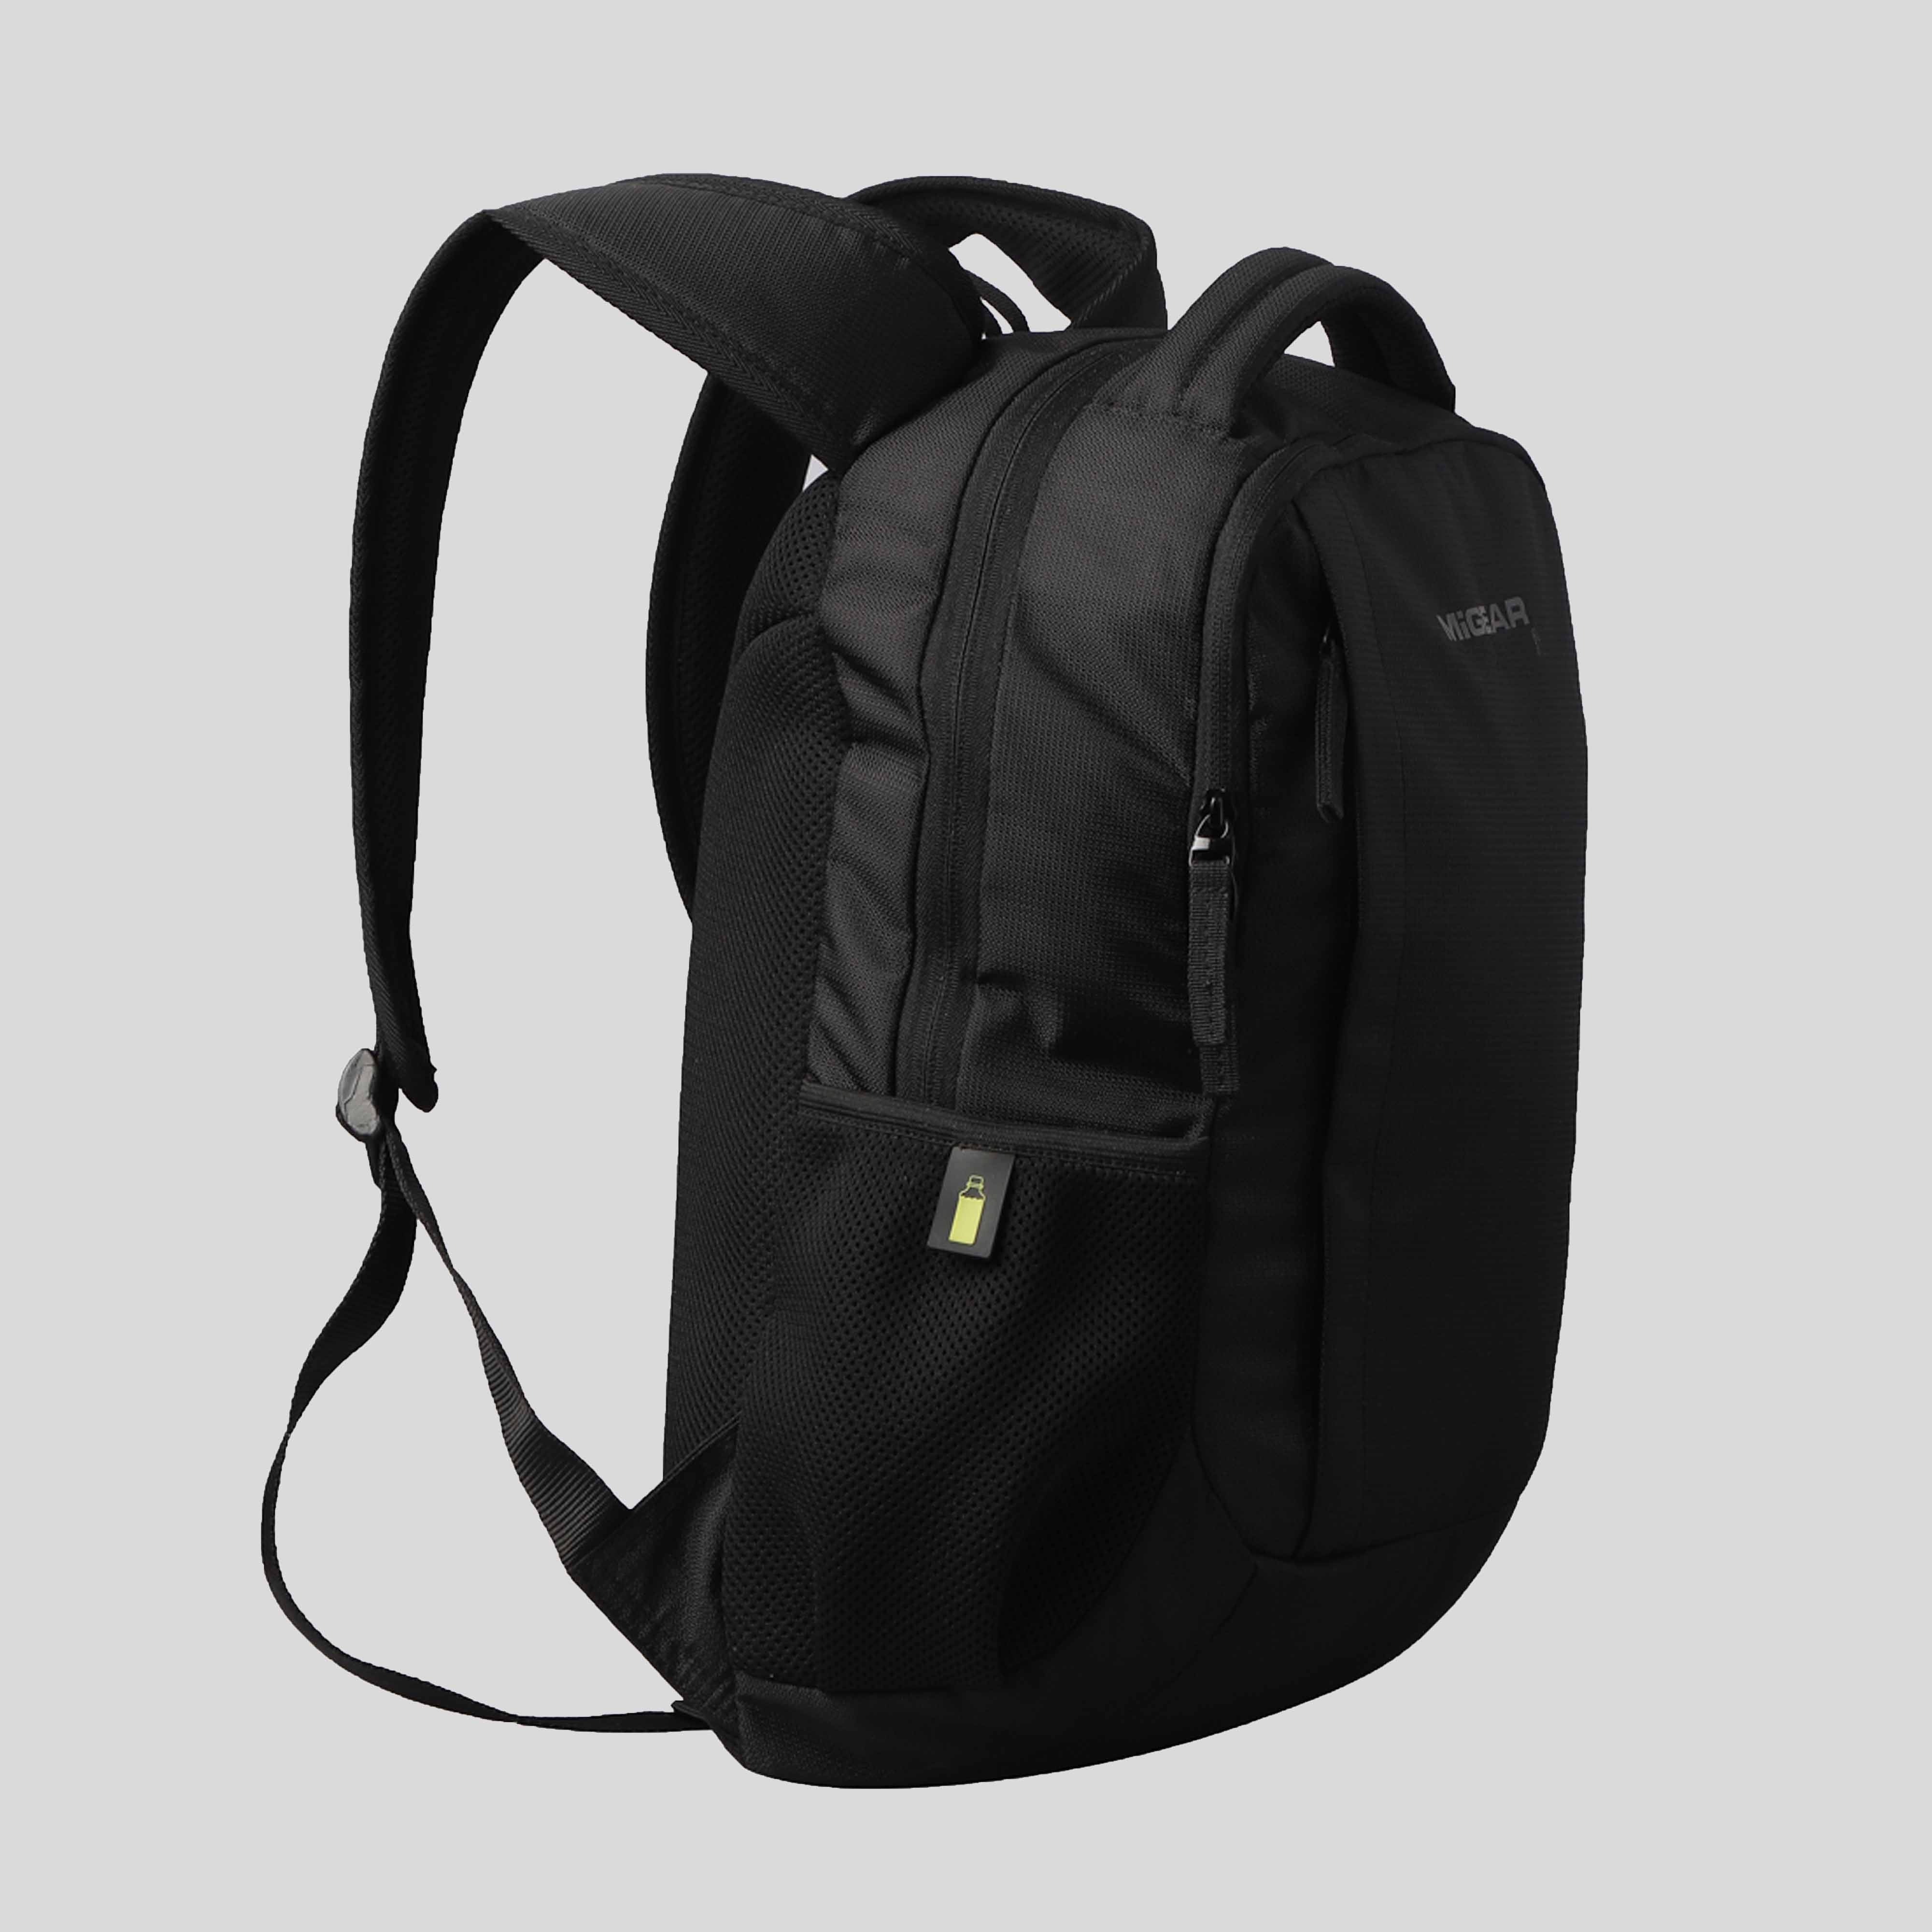 The Draft Backpack